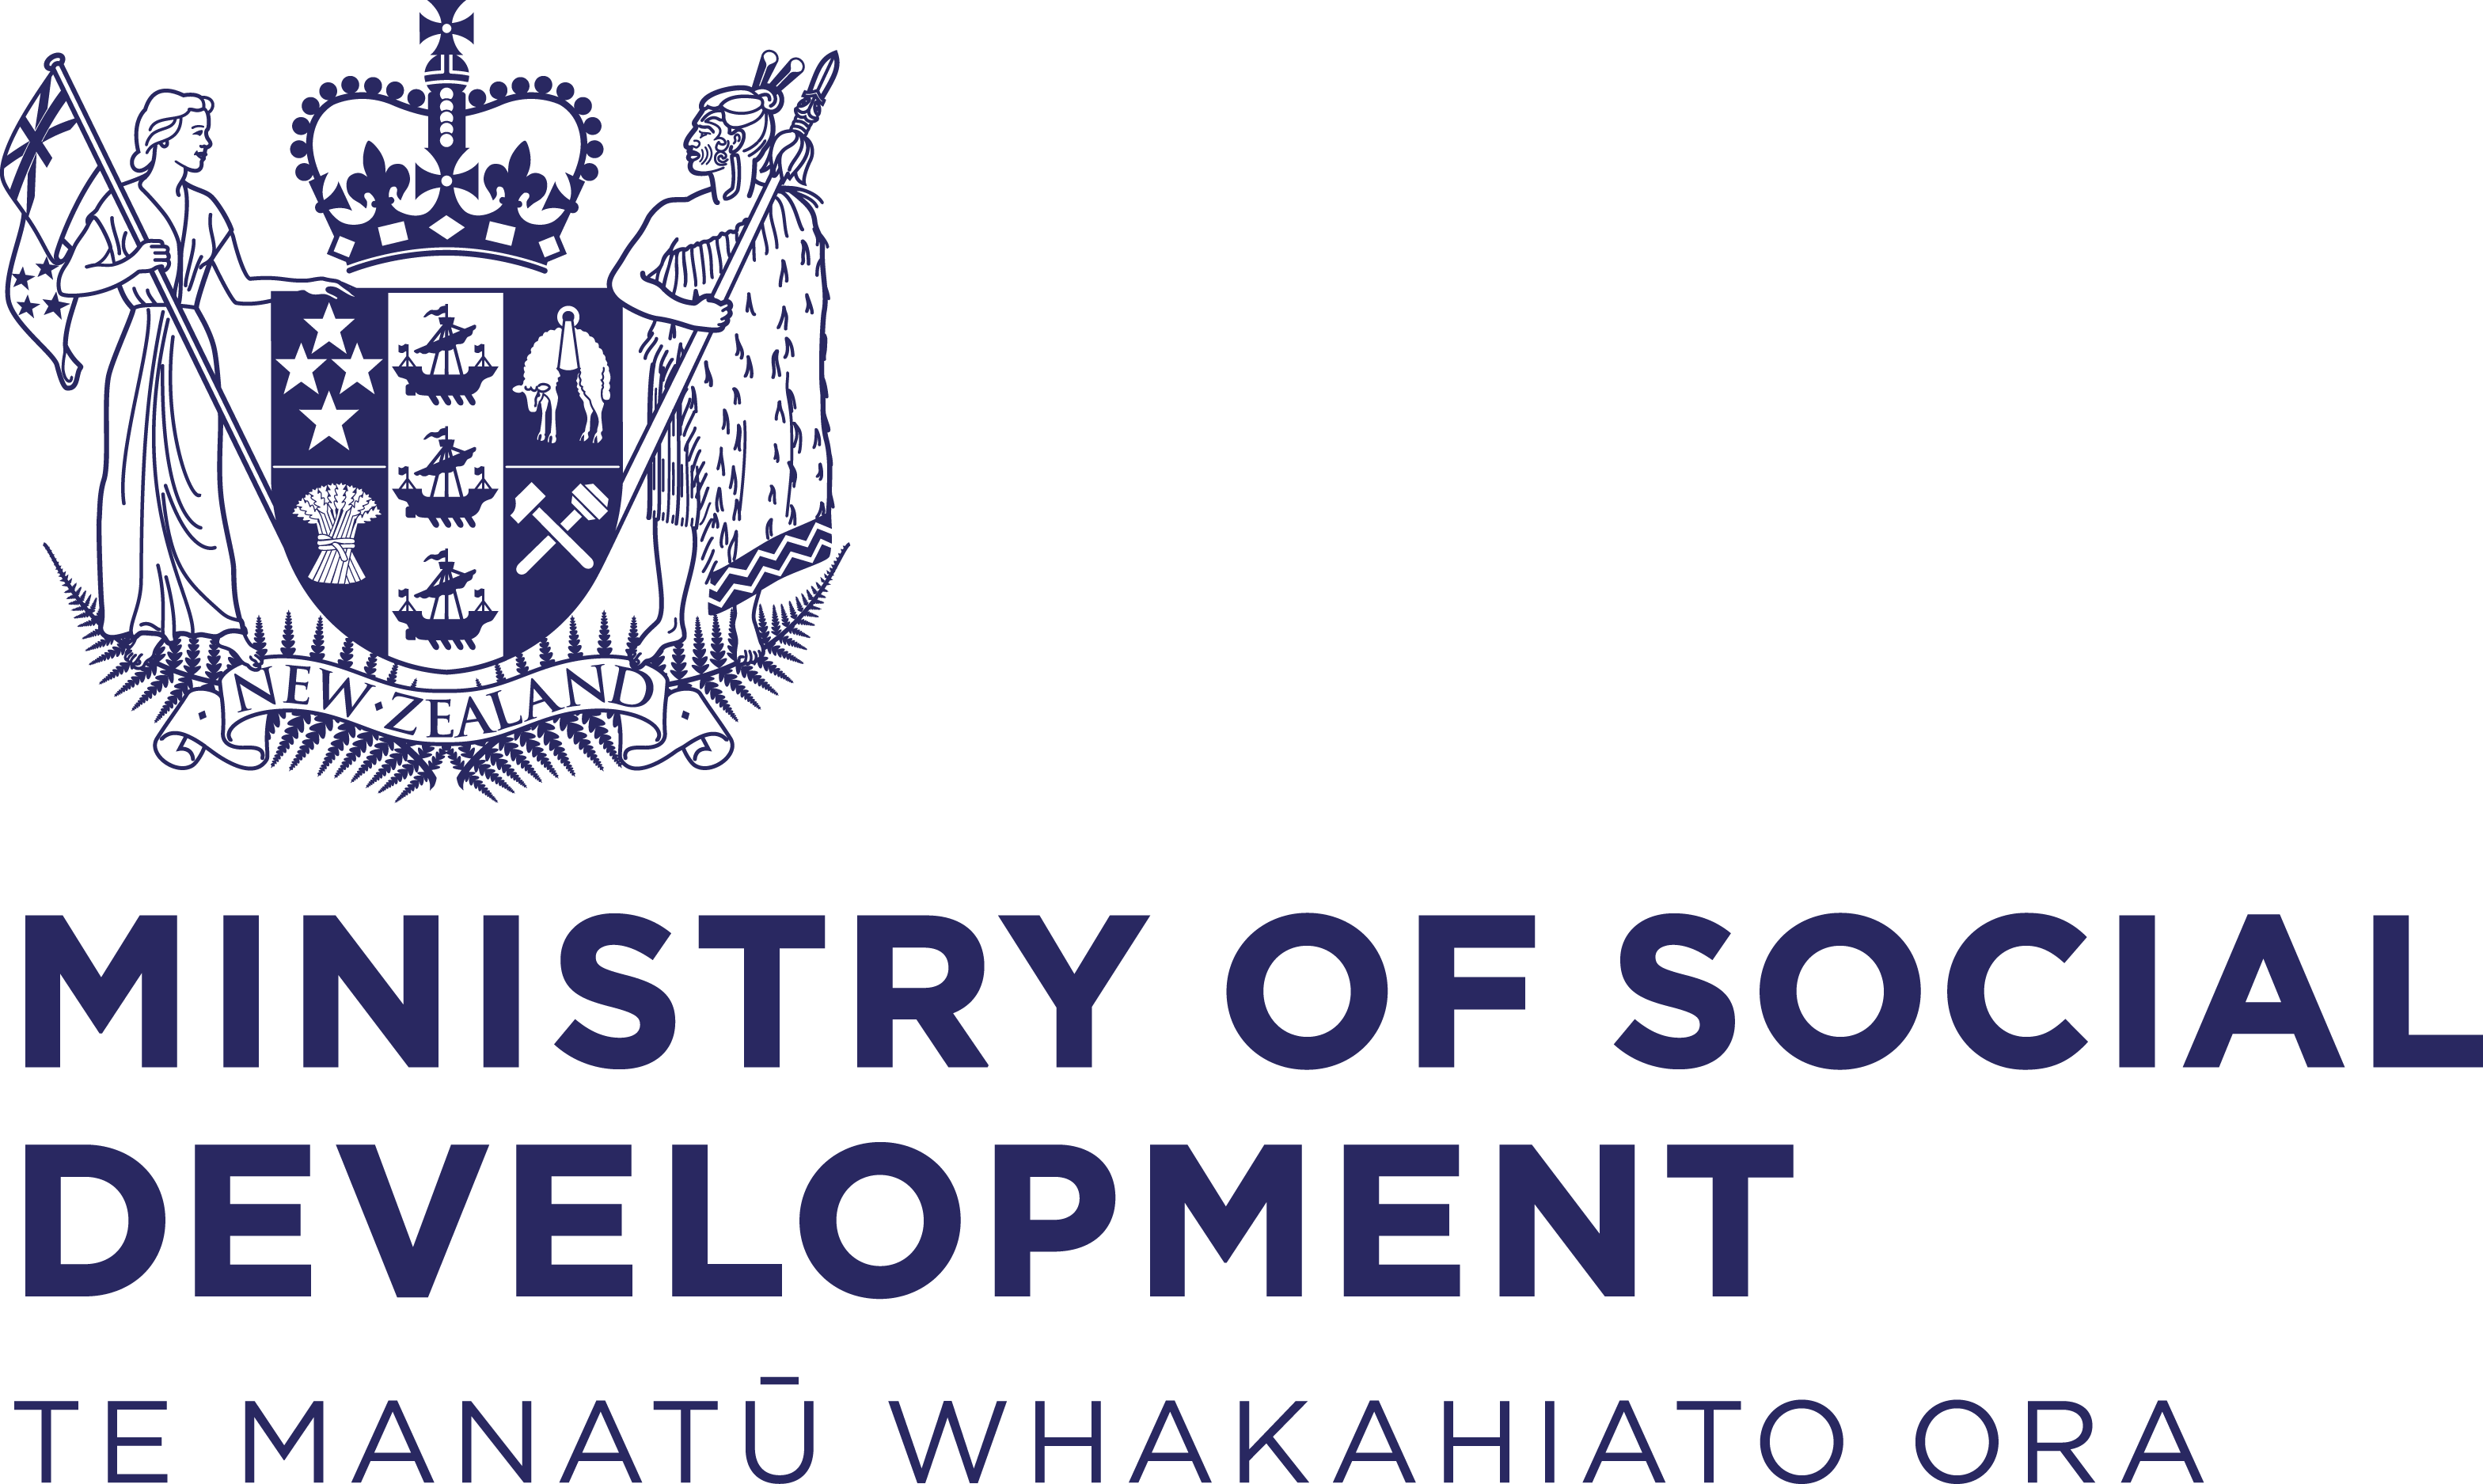 The Ministry of Social Development